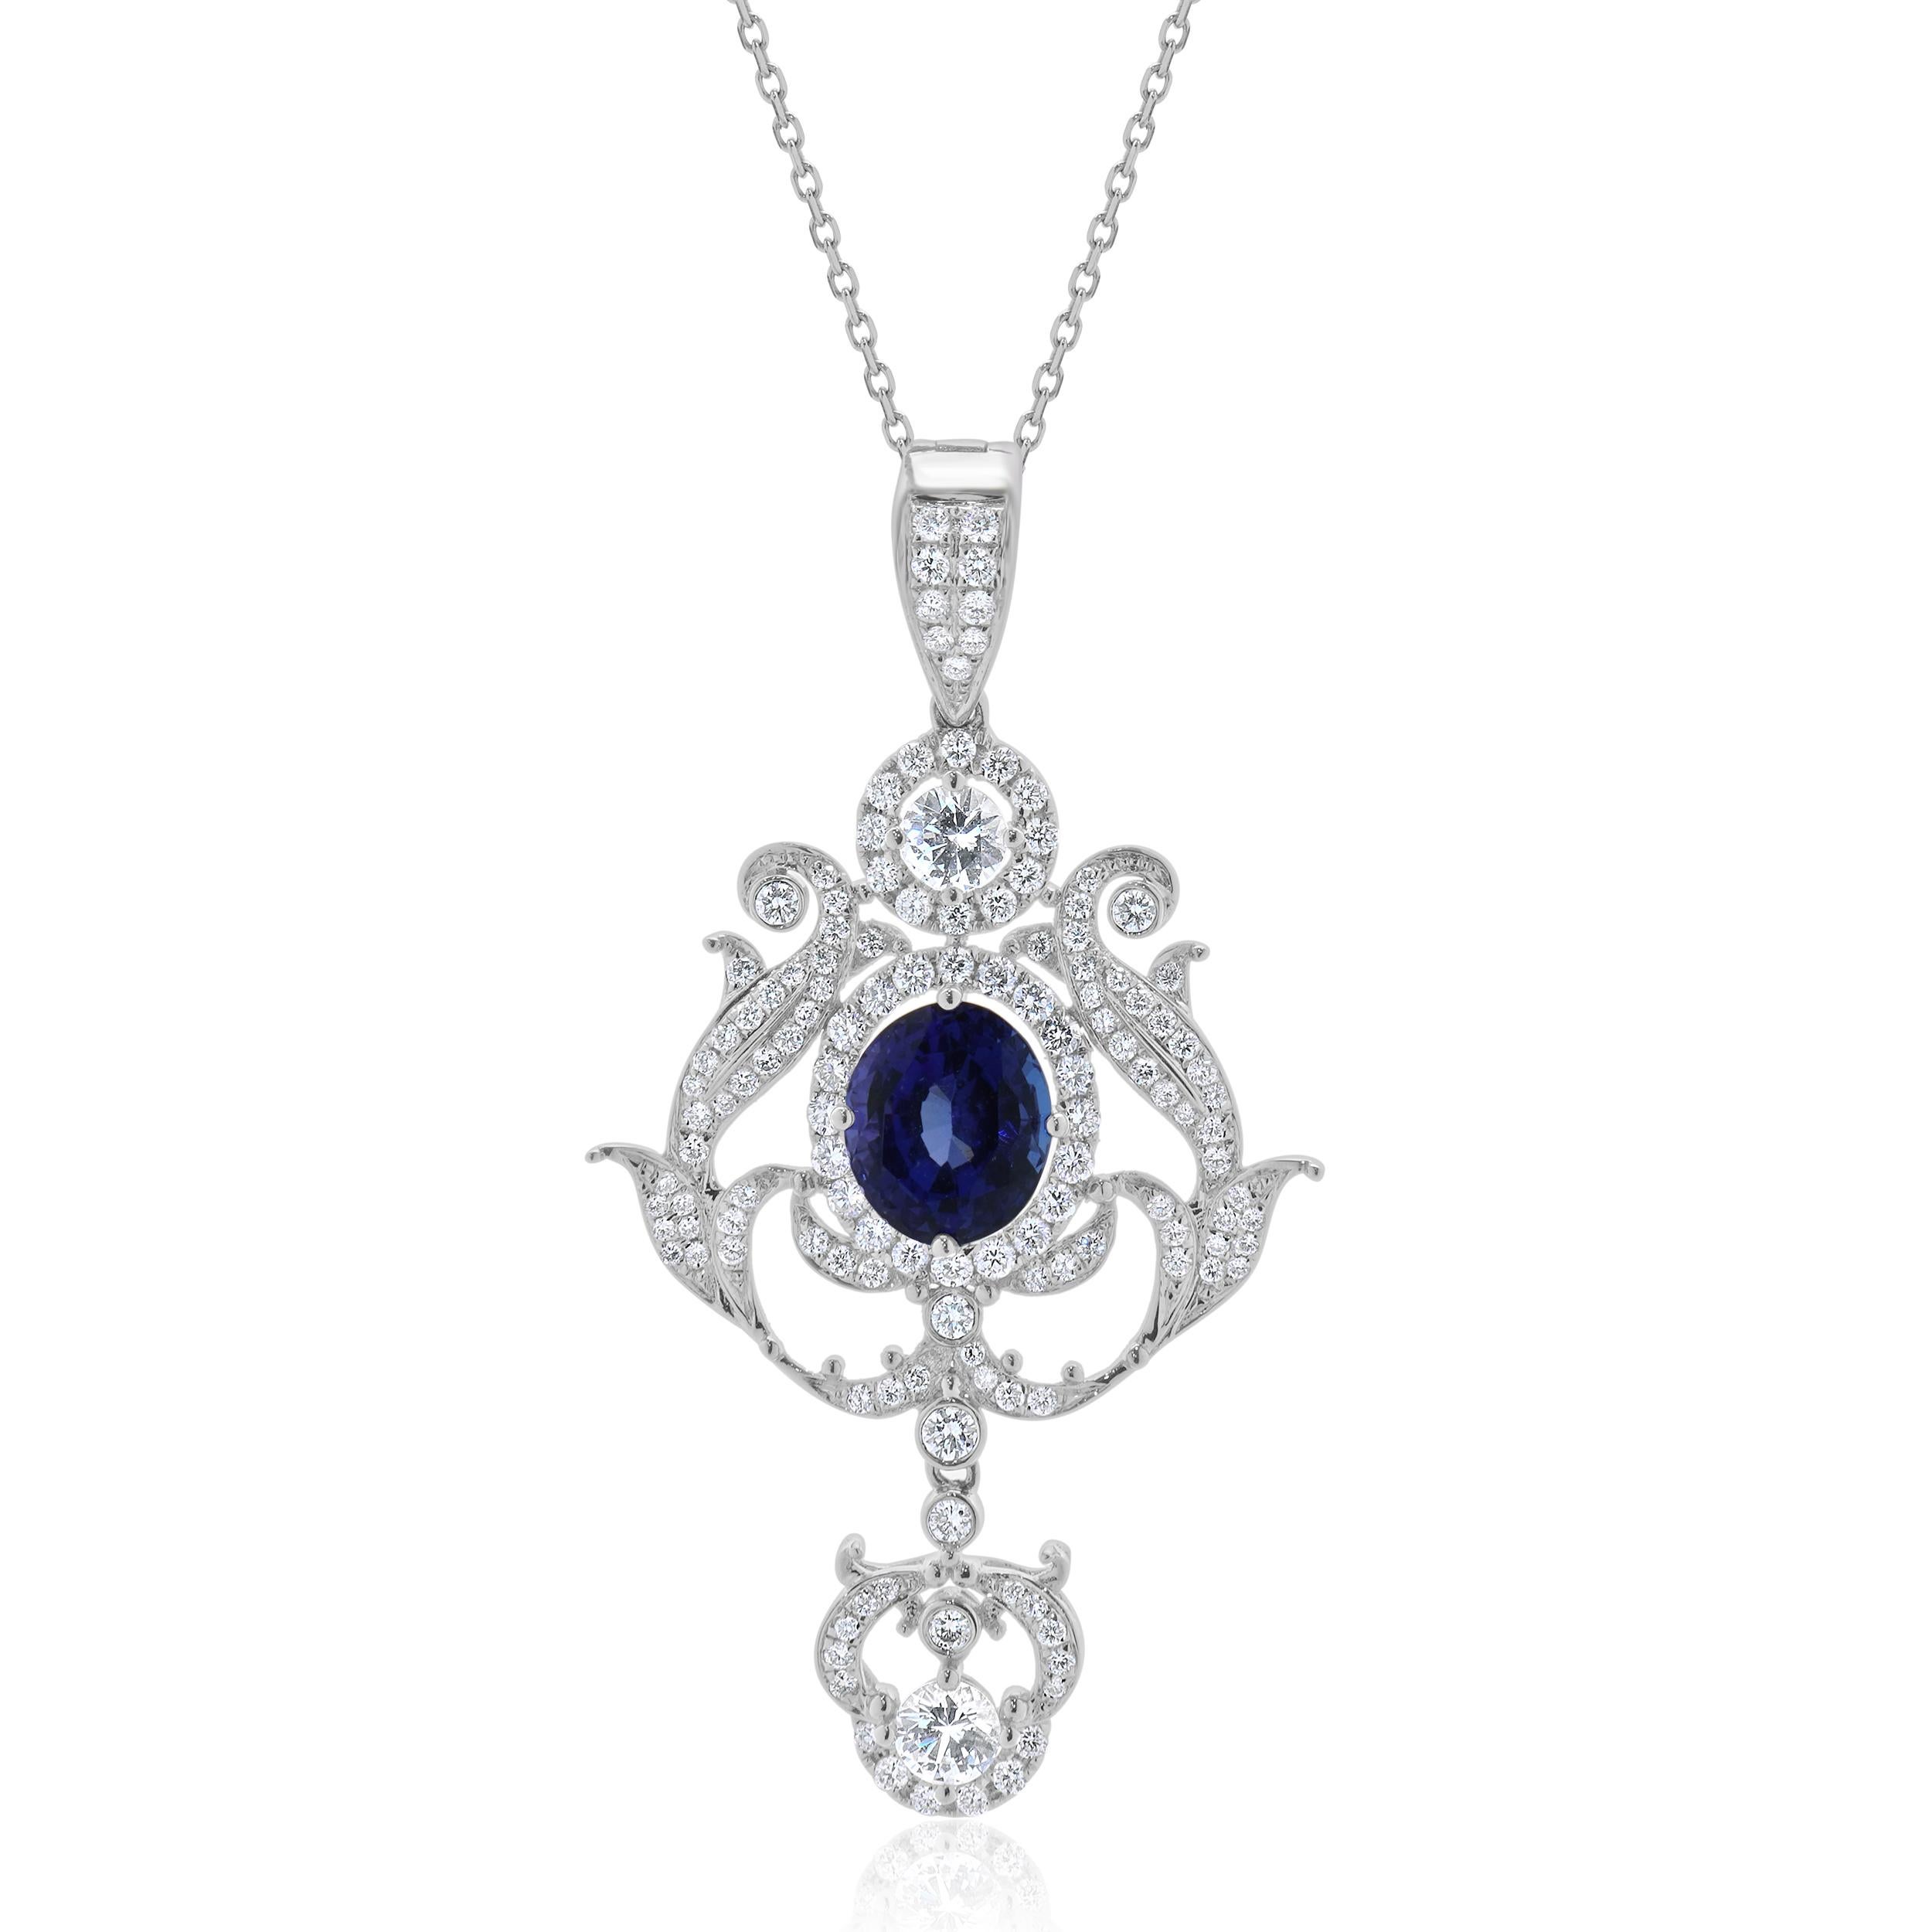 Designer: custom 
Material: 18K white gold
Diamonds: round brilliant cut = 1.13cttw
Color: G
Clarity: SI1
White Sapphire= 0.56cttw
Tanzanite= 3.02cttw
Dimensions: necklace measures 18-inches long 
Weight: 10.57 grams
